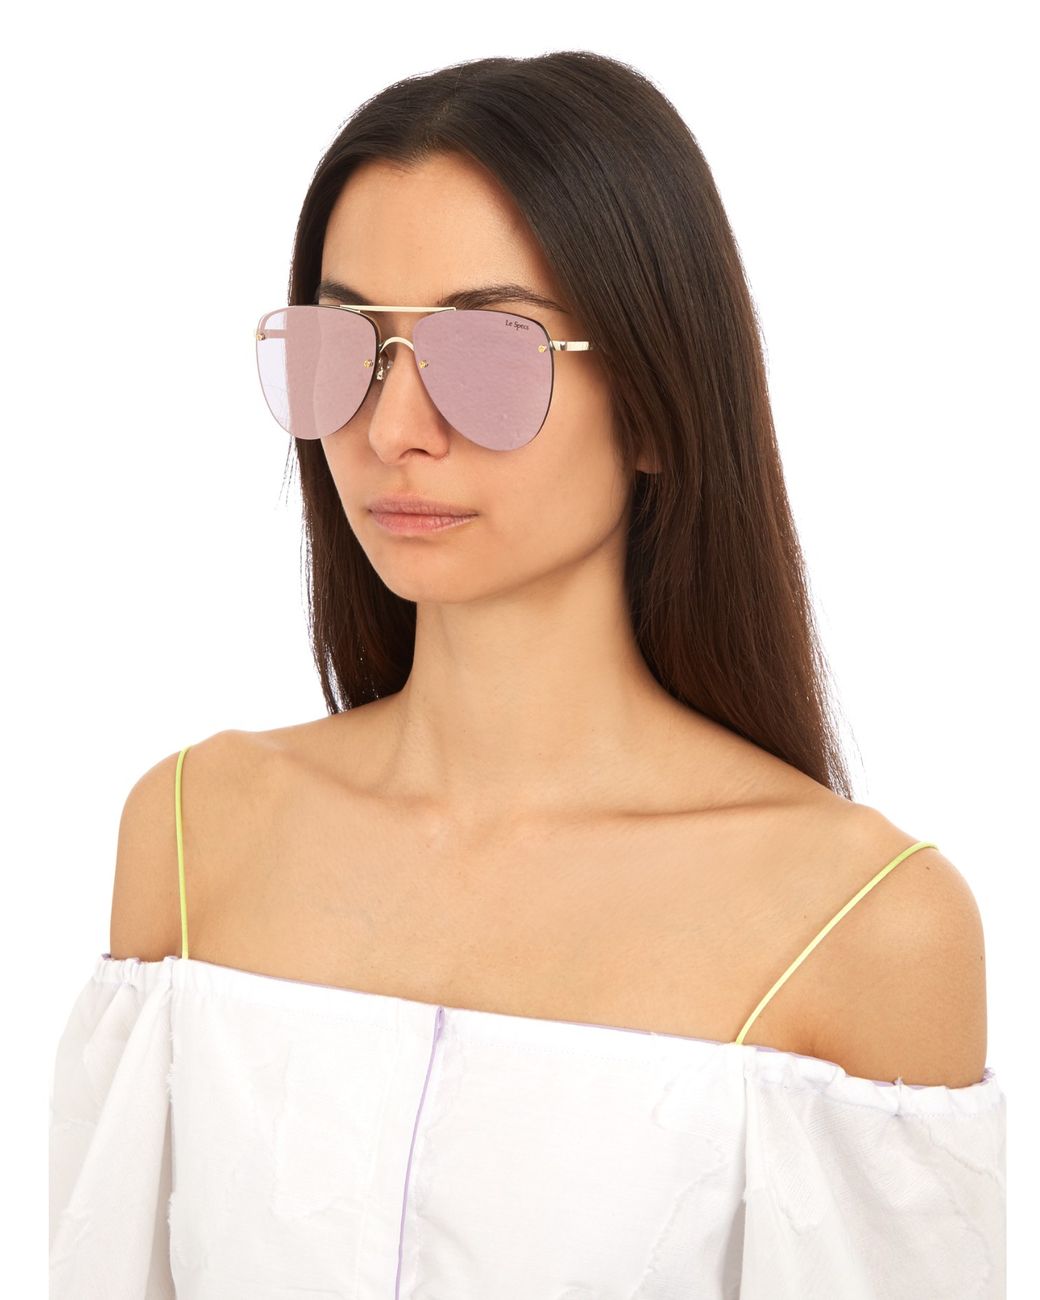 Le Specs The Prince Aviator Sunglasses in Pink | Lyst